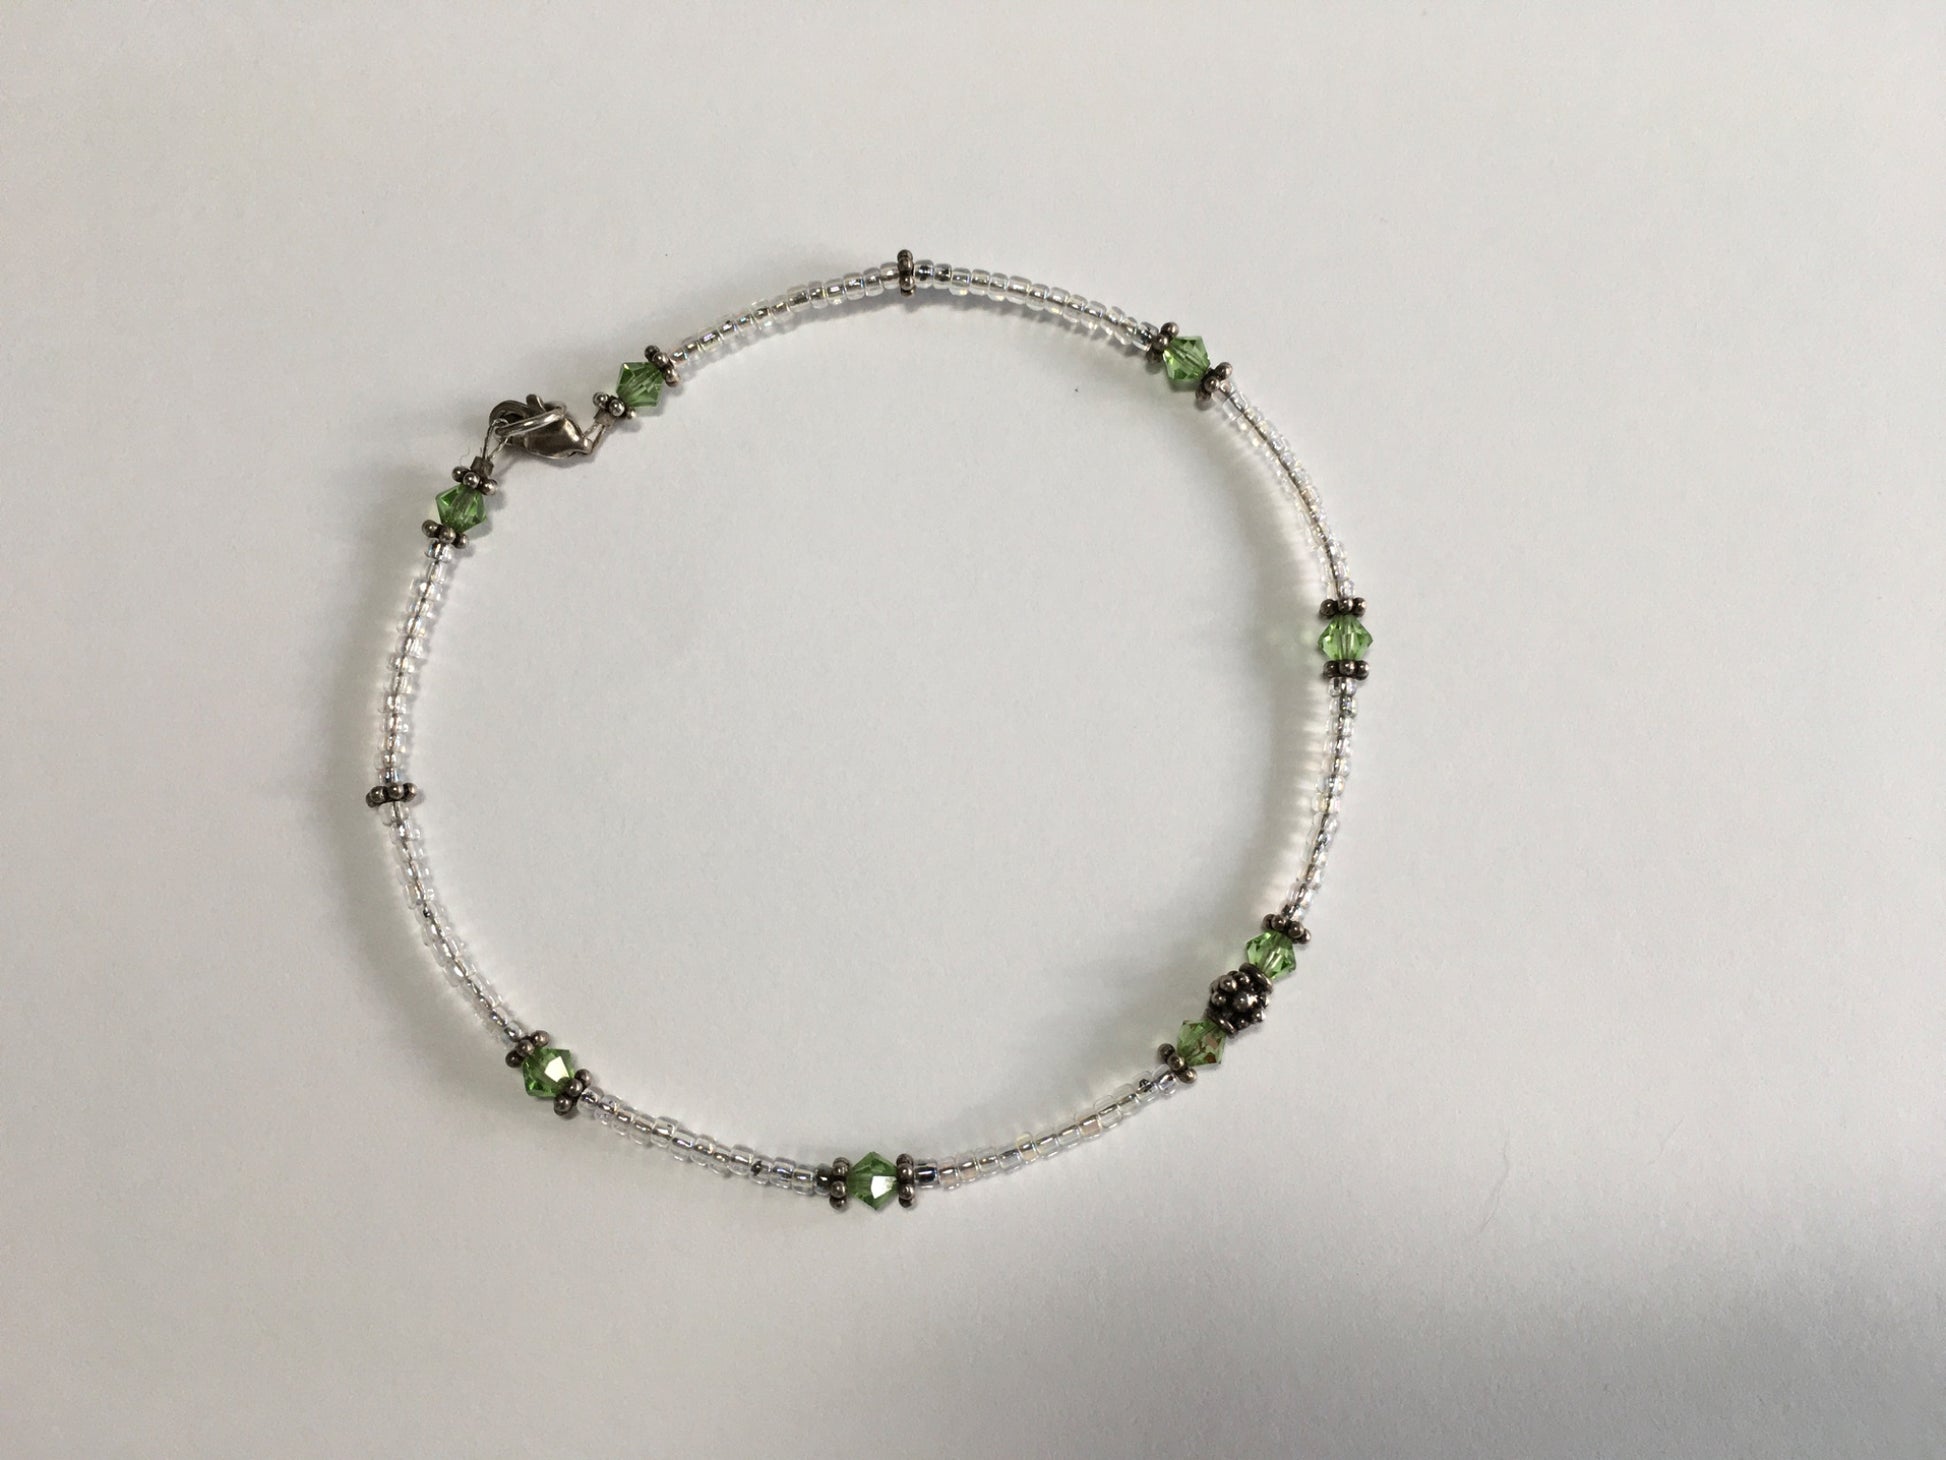 Anklets, Made with Sterling Silver and Swarovski Crystals  - 4